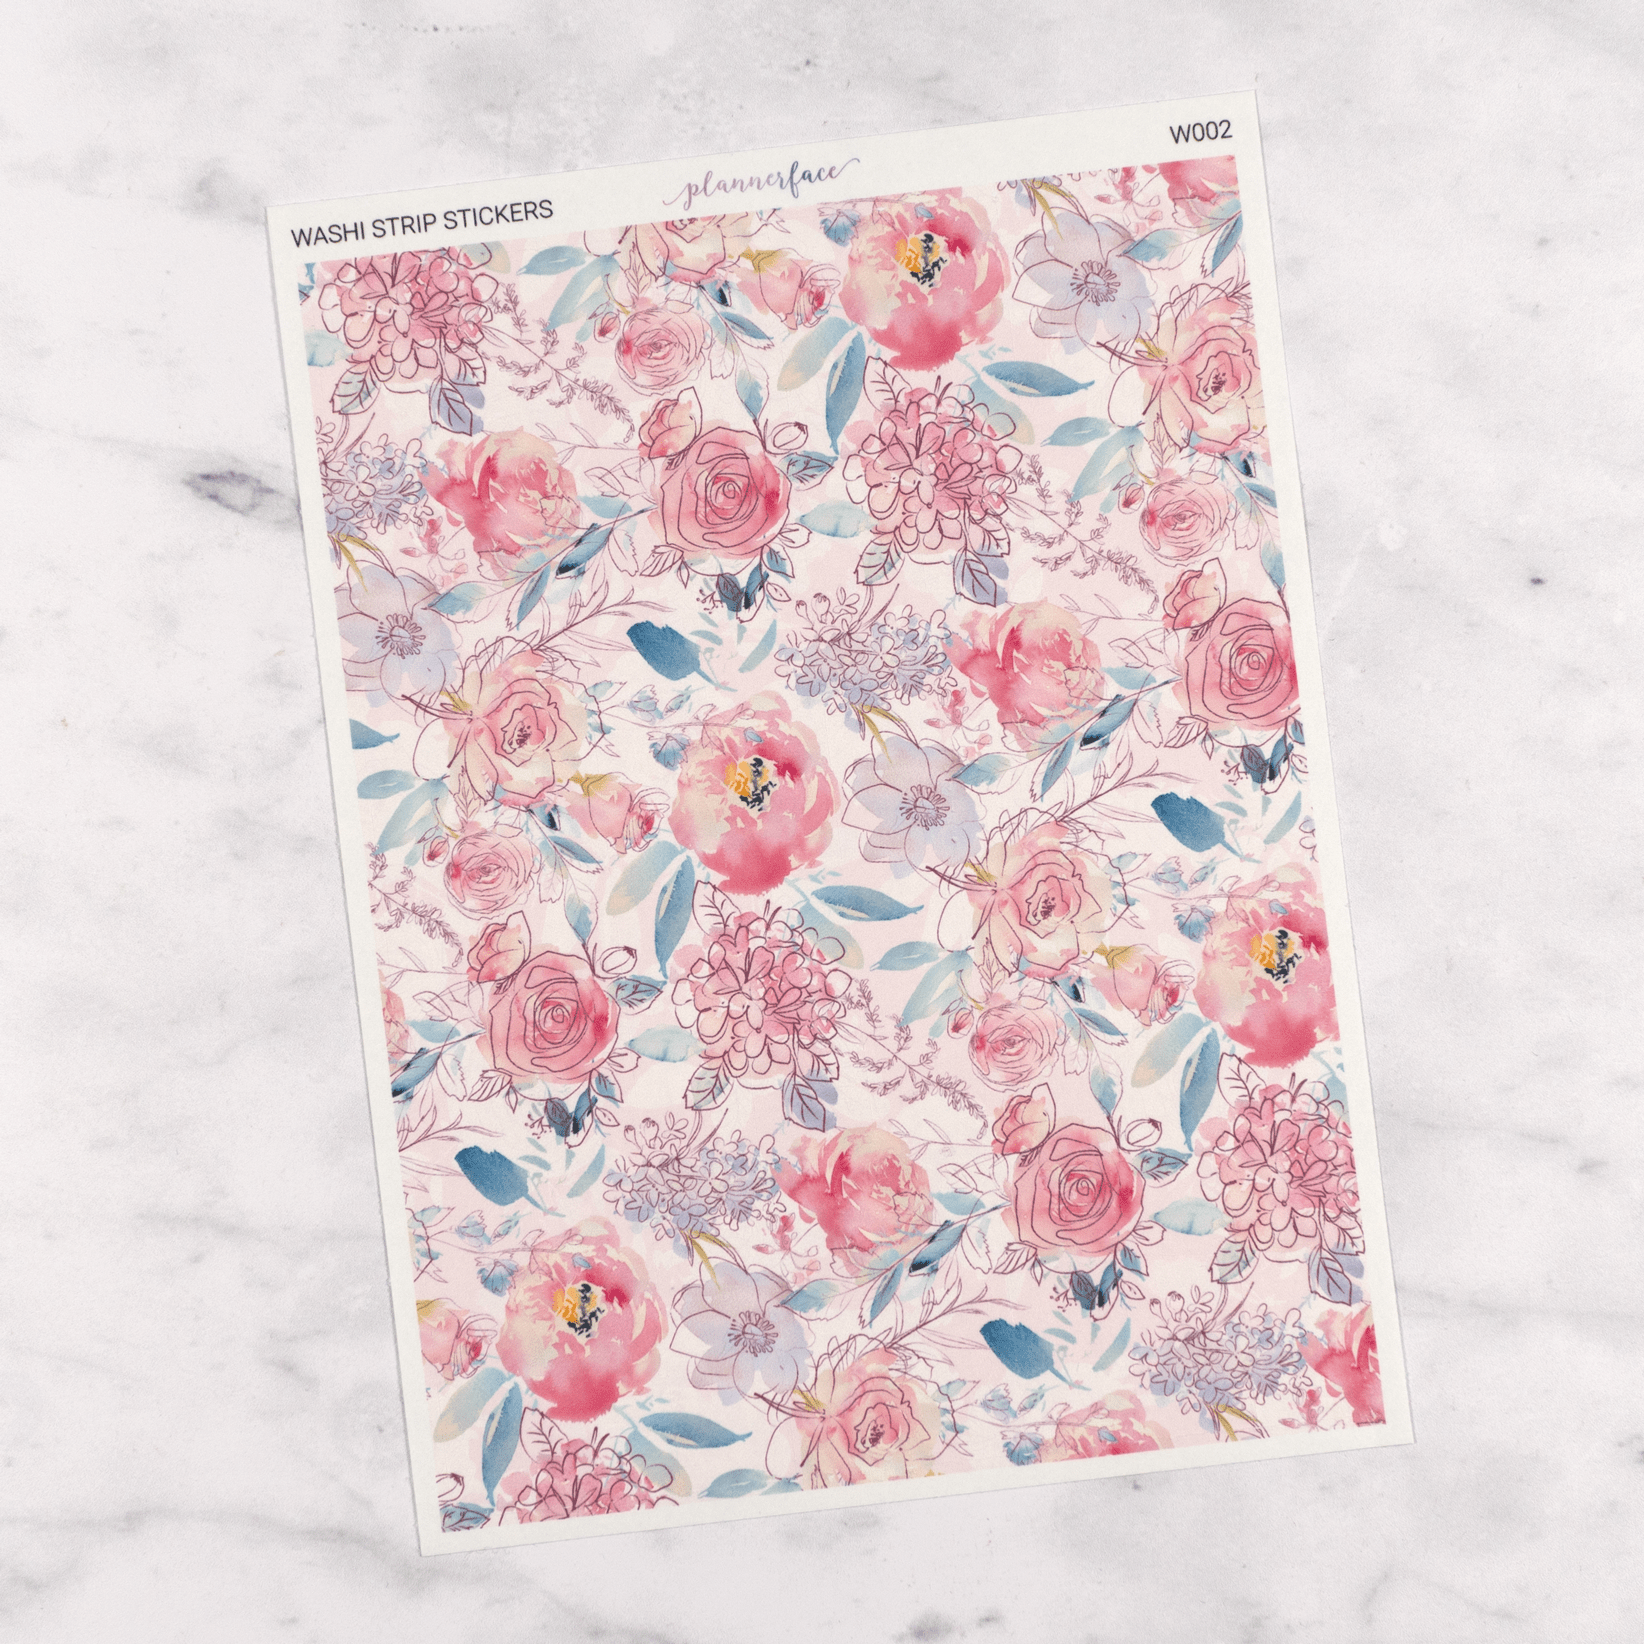 Pale Pink Floral | Washi Tape Strips by Plannerface